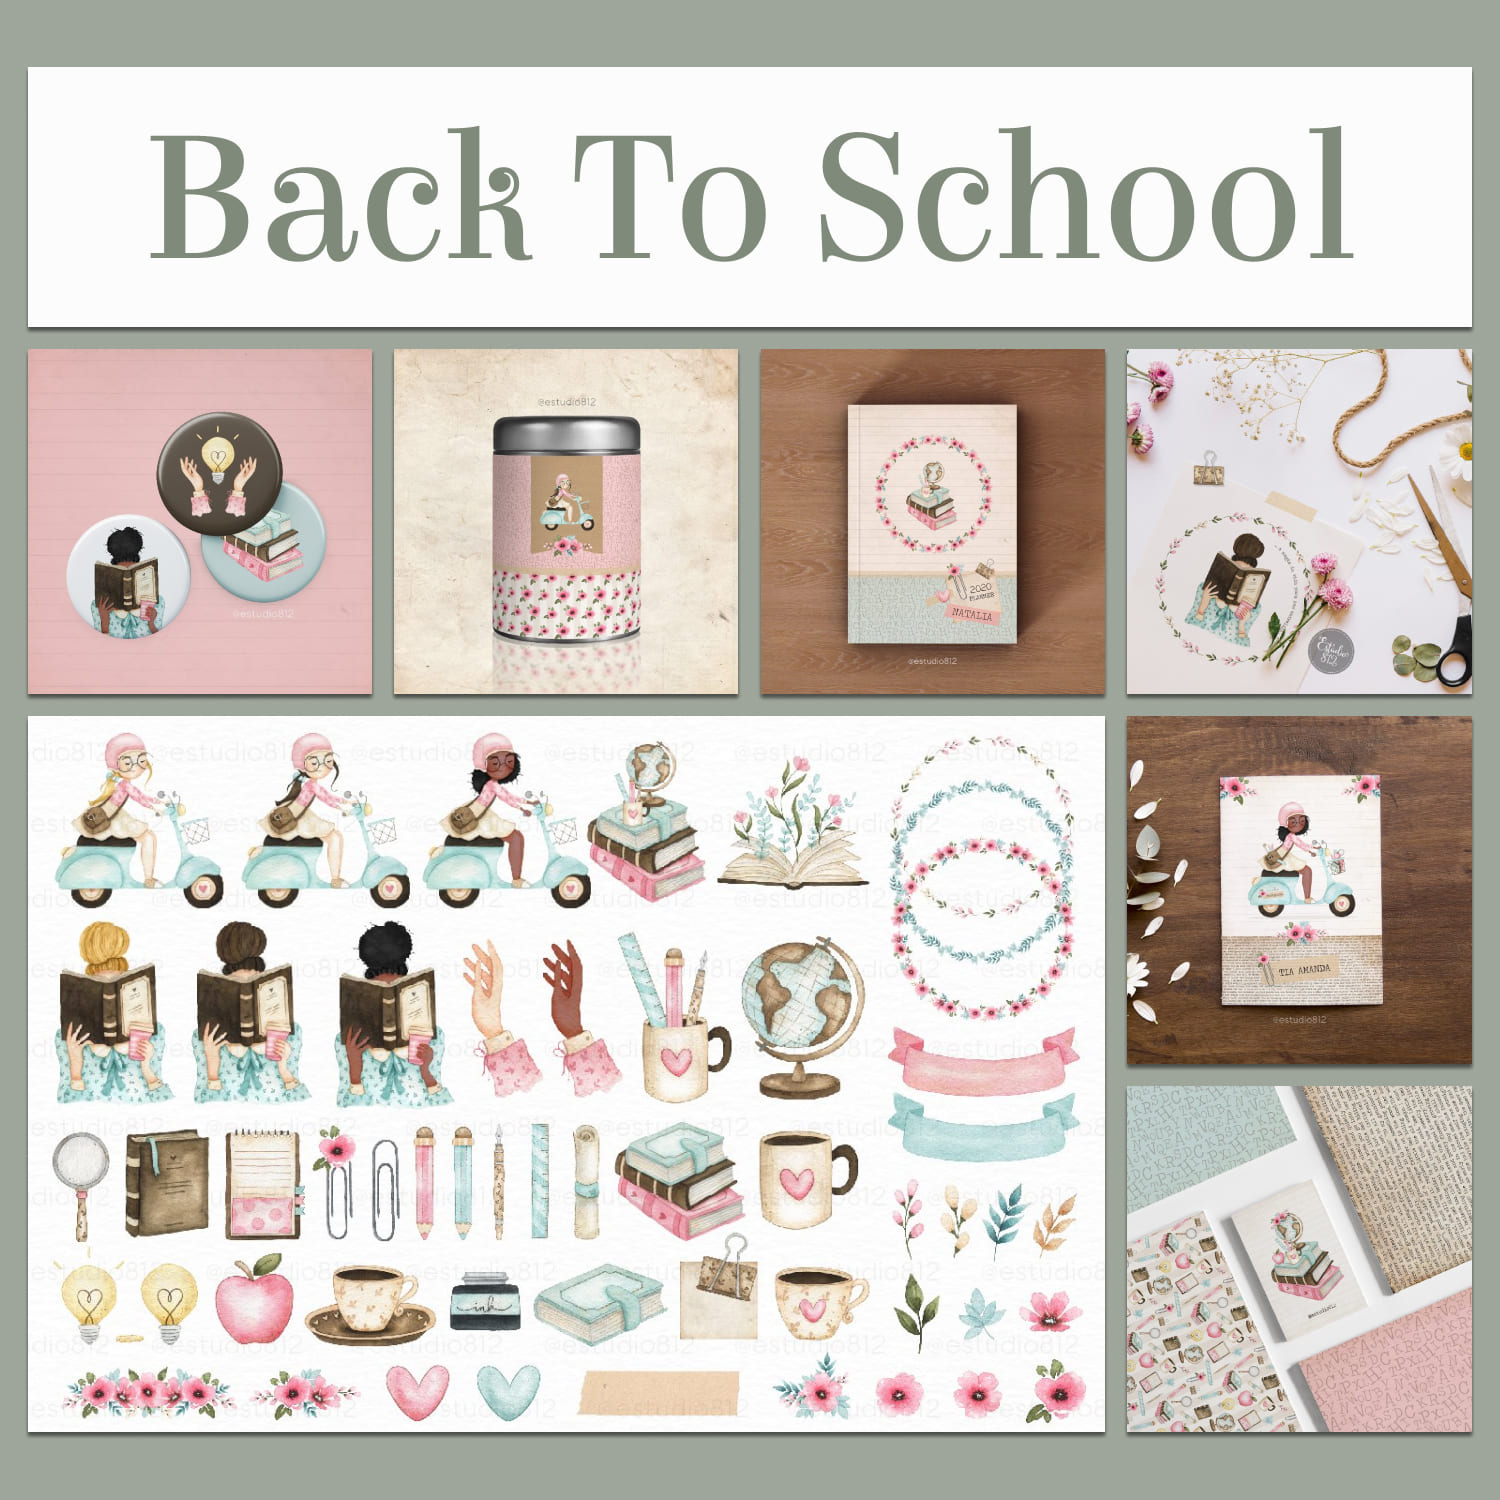 Back to school - main image preview.